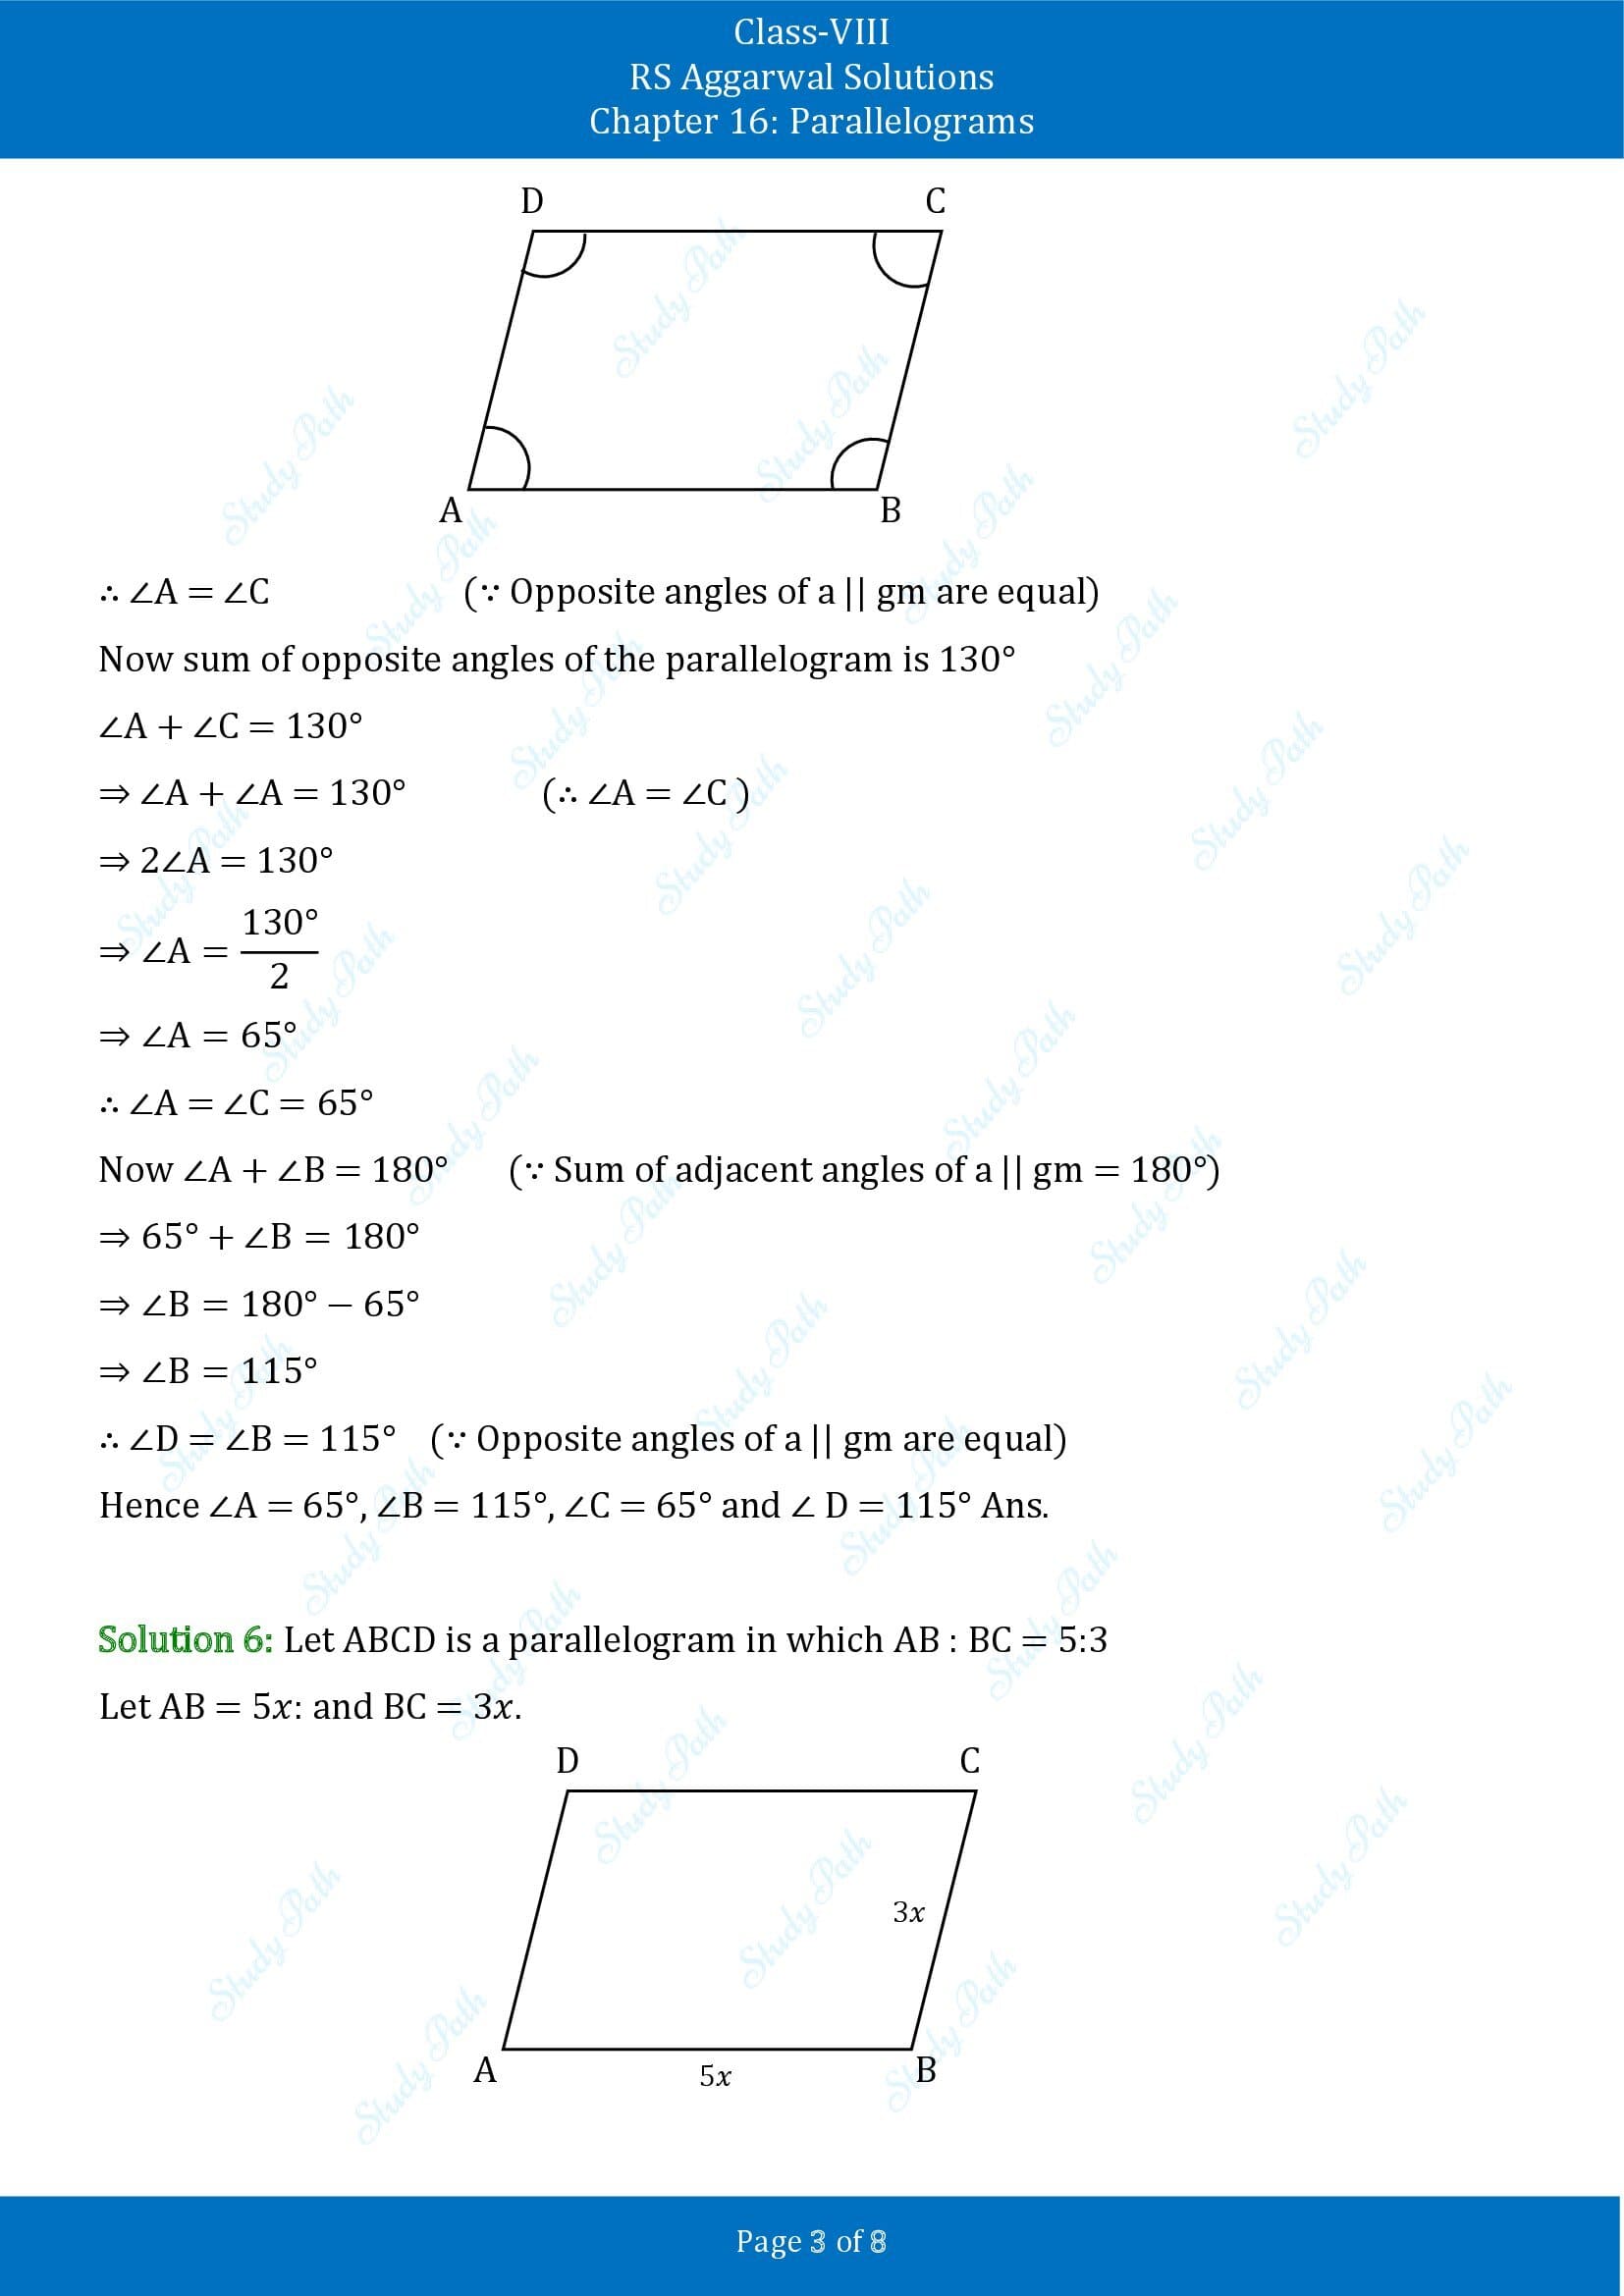 RS Aggarwal Solutions Class 8 Chapter 16 Parallelograms Exercise 16A 00003